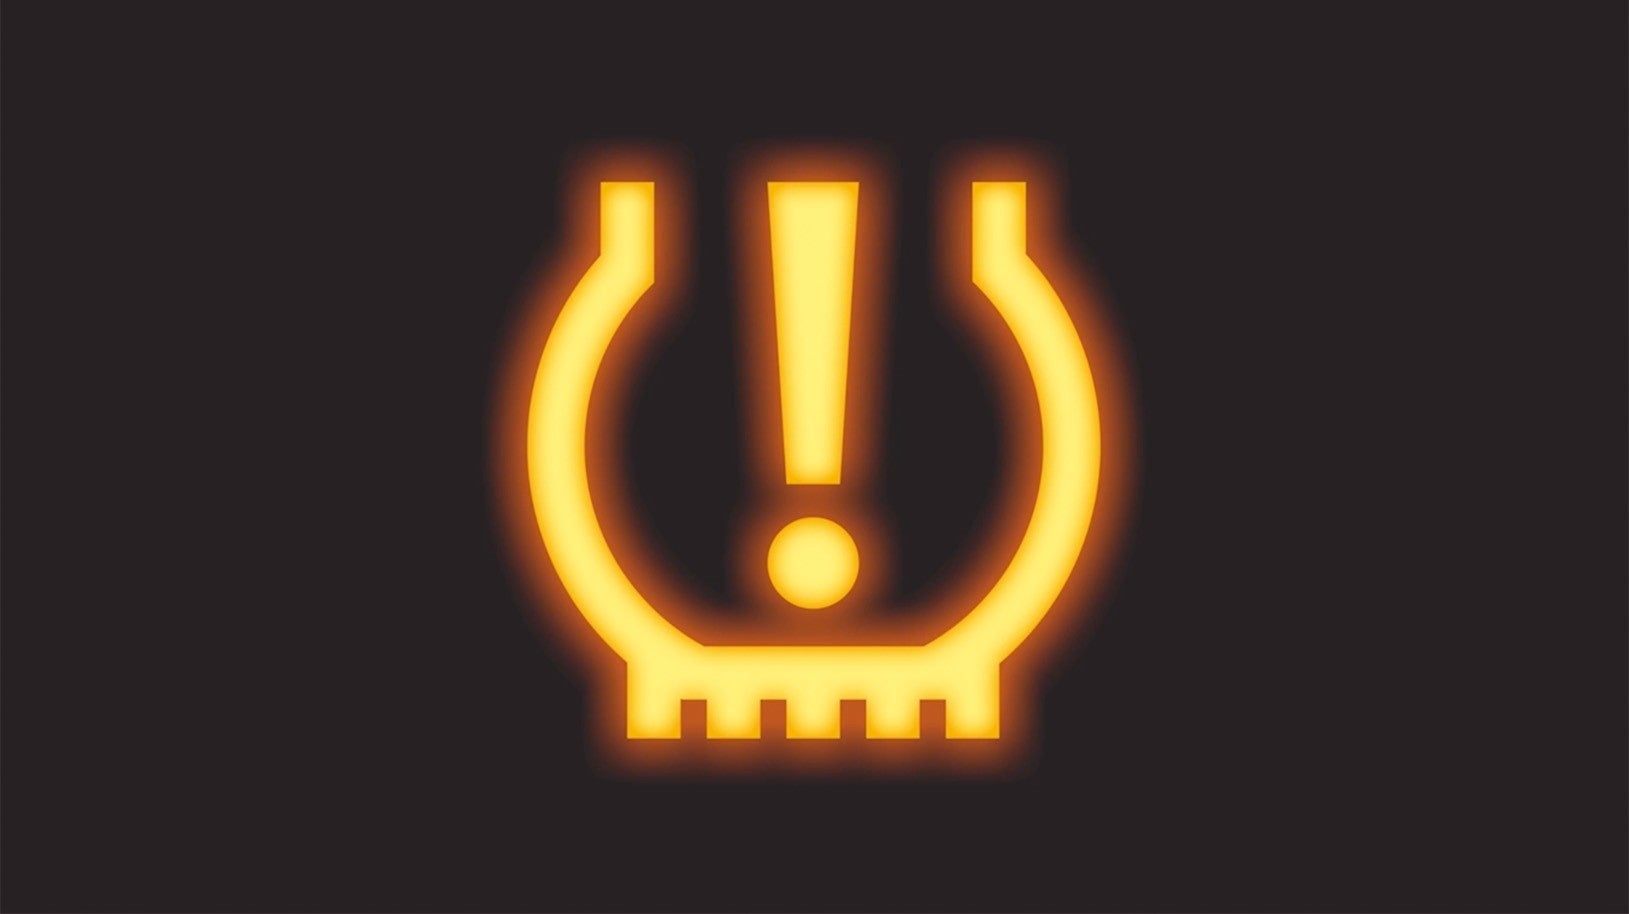  Image of the Tire Pressure Monitoring System Light | Williams Subaru in Charlotte NC